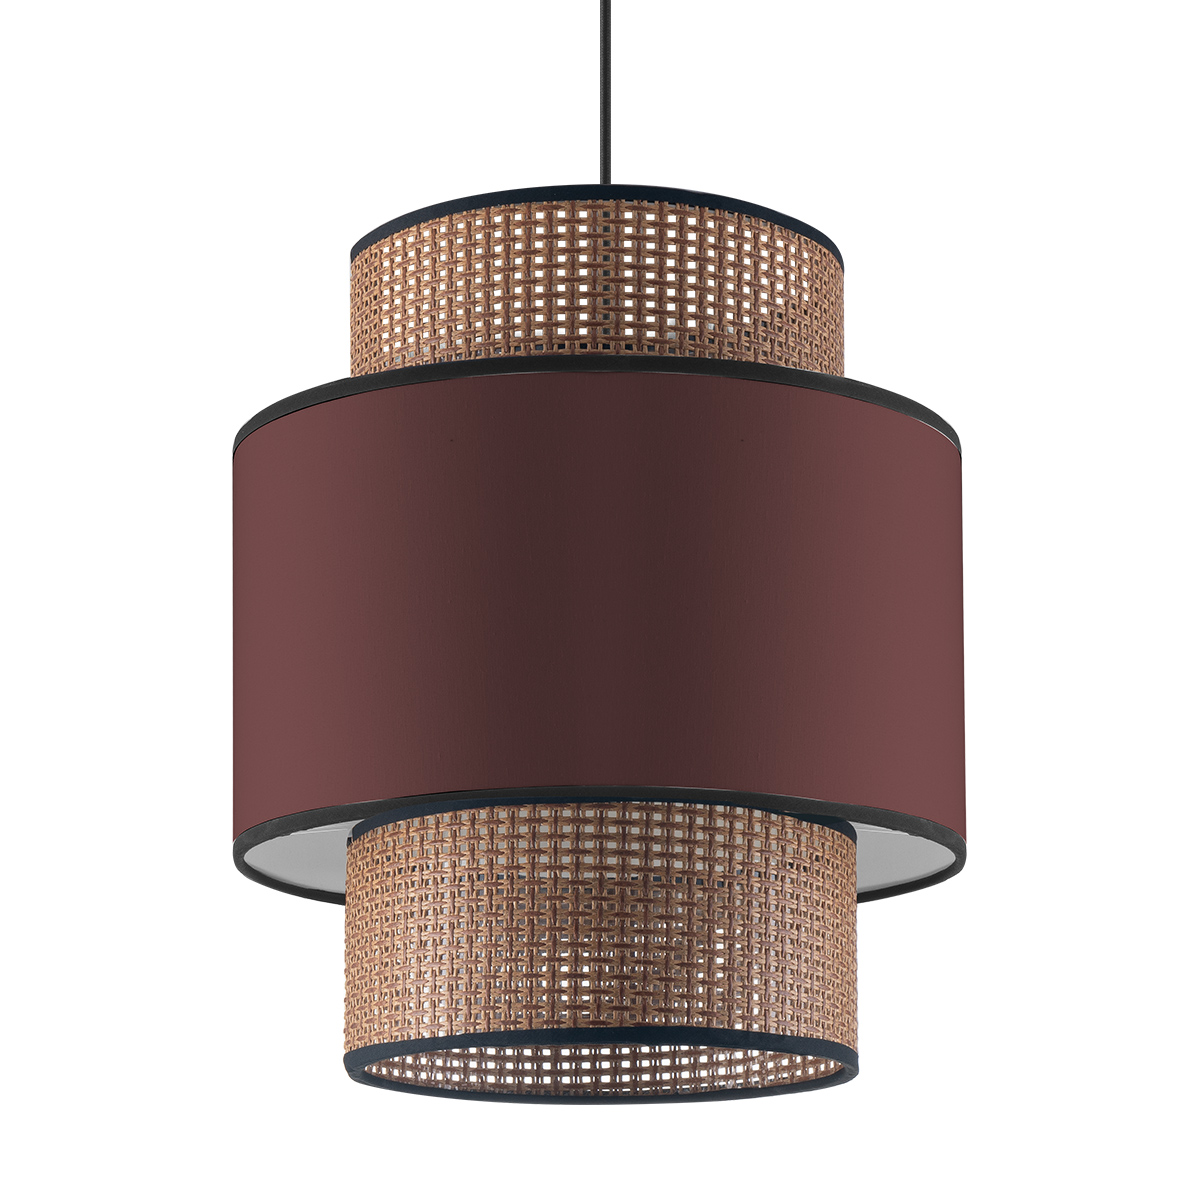 Tangla lighting - TLS7014-30RD - Decorative Lampshade - natural rattan and TC fabric in red - night - E27